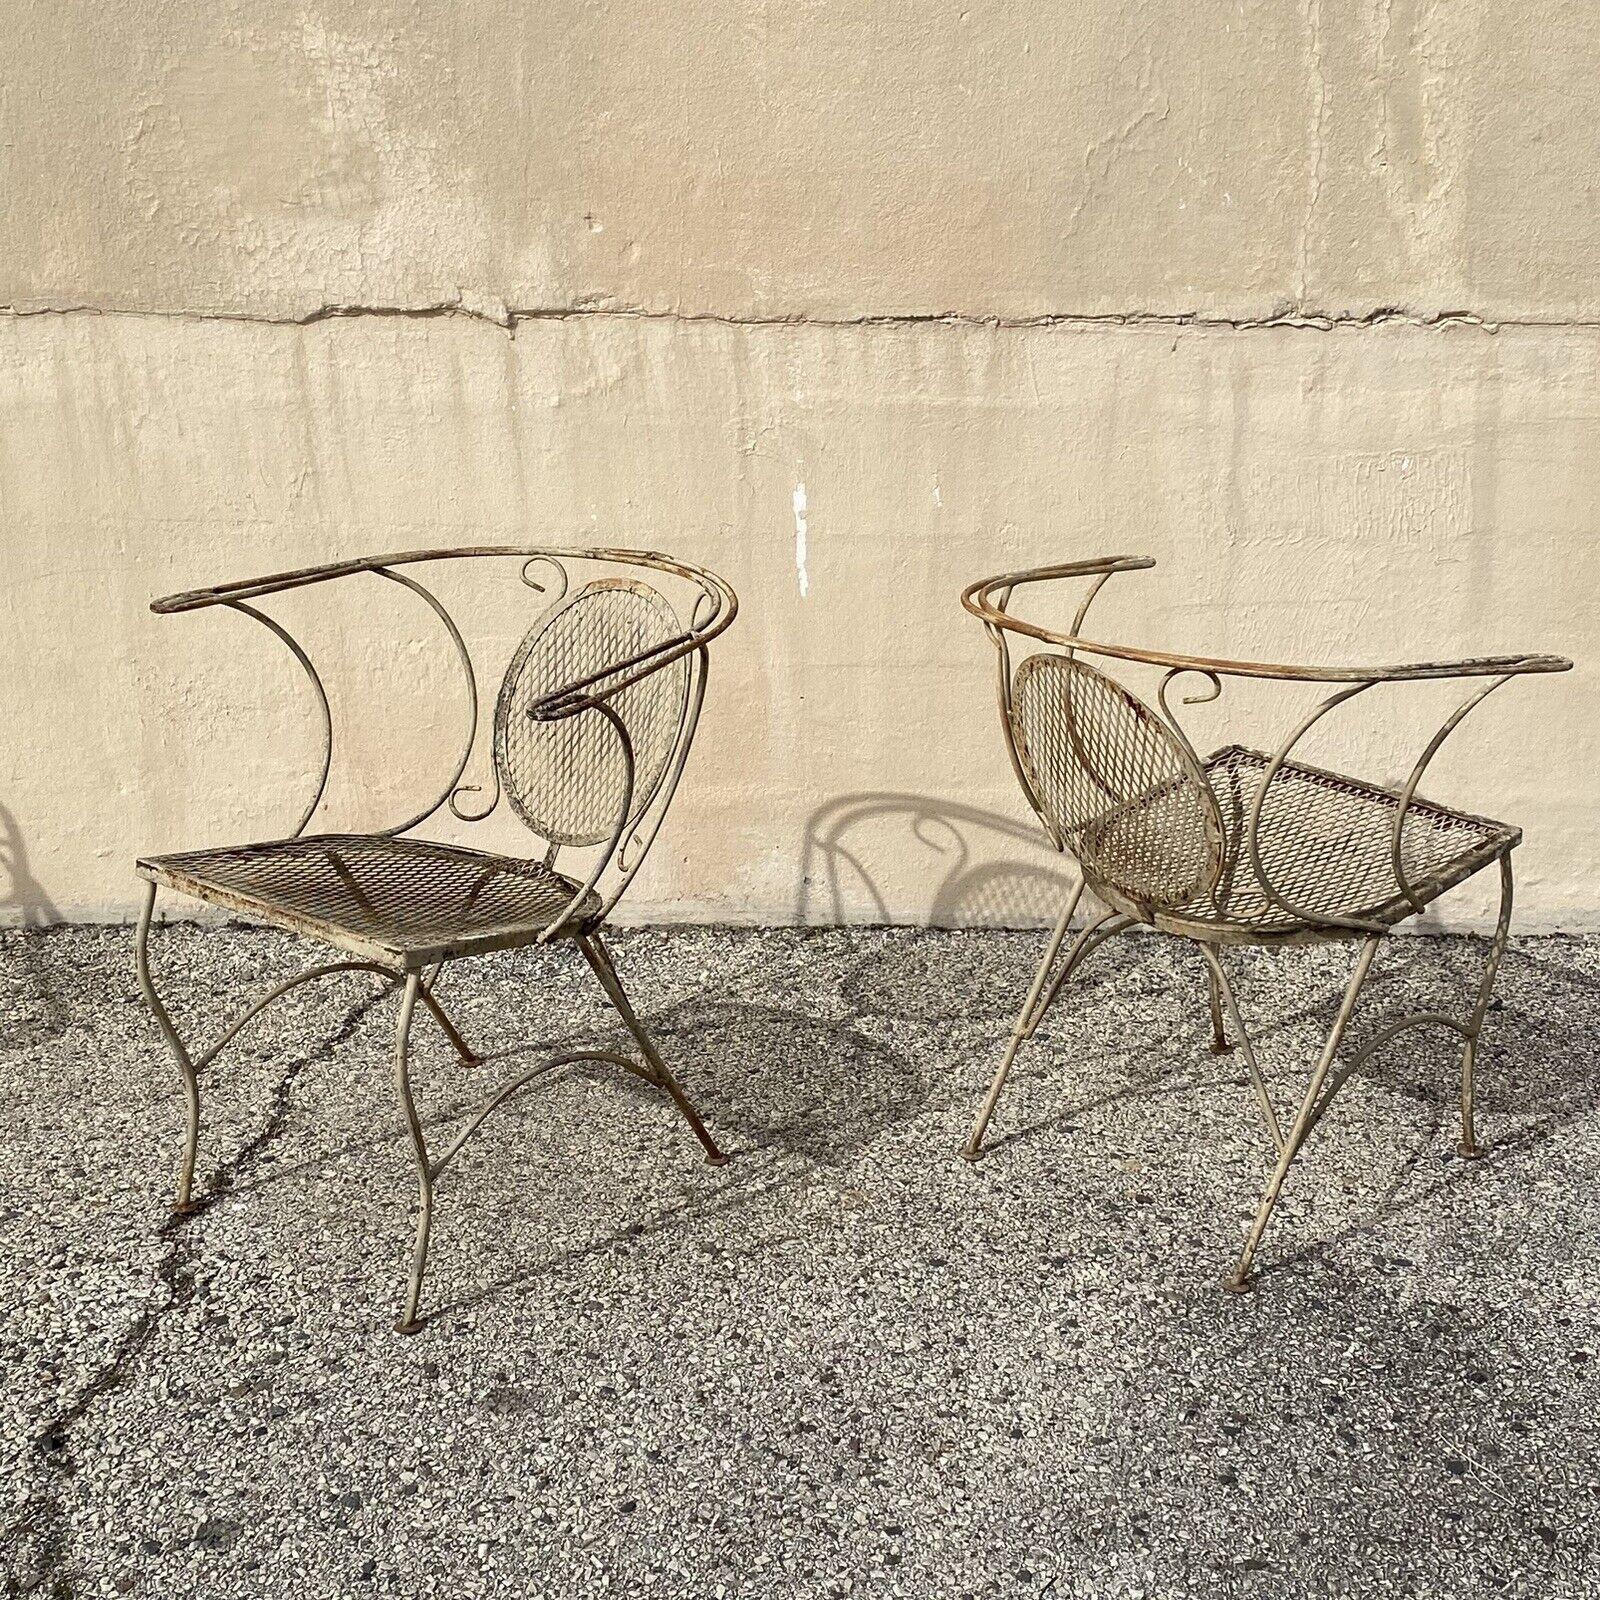 Vintage Mid Century Wrought Iron Barrel Back Garden Patio Chairs - a Pair. Circa Mid 20th Century. Measurements: 29